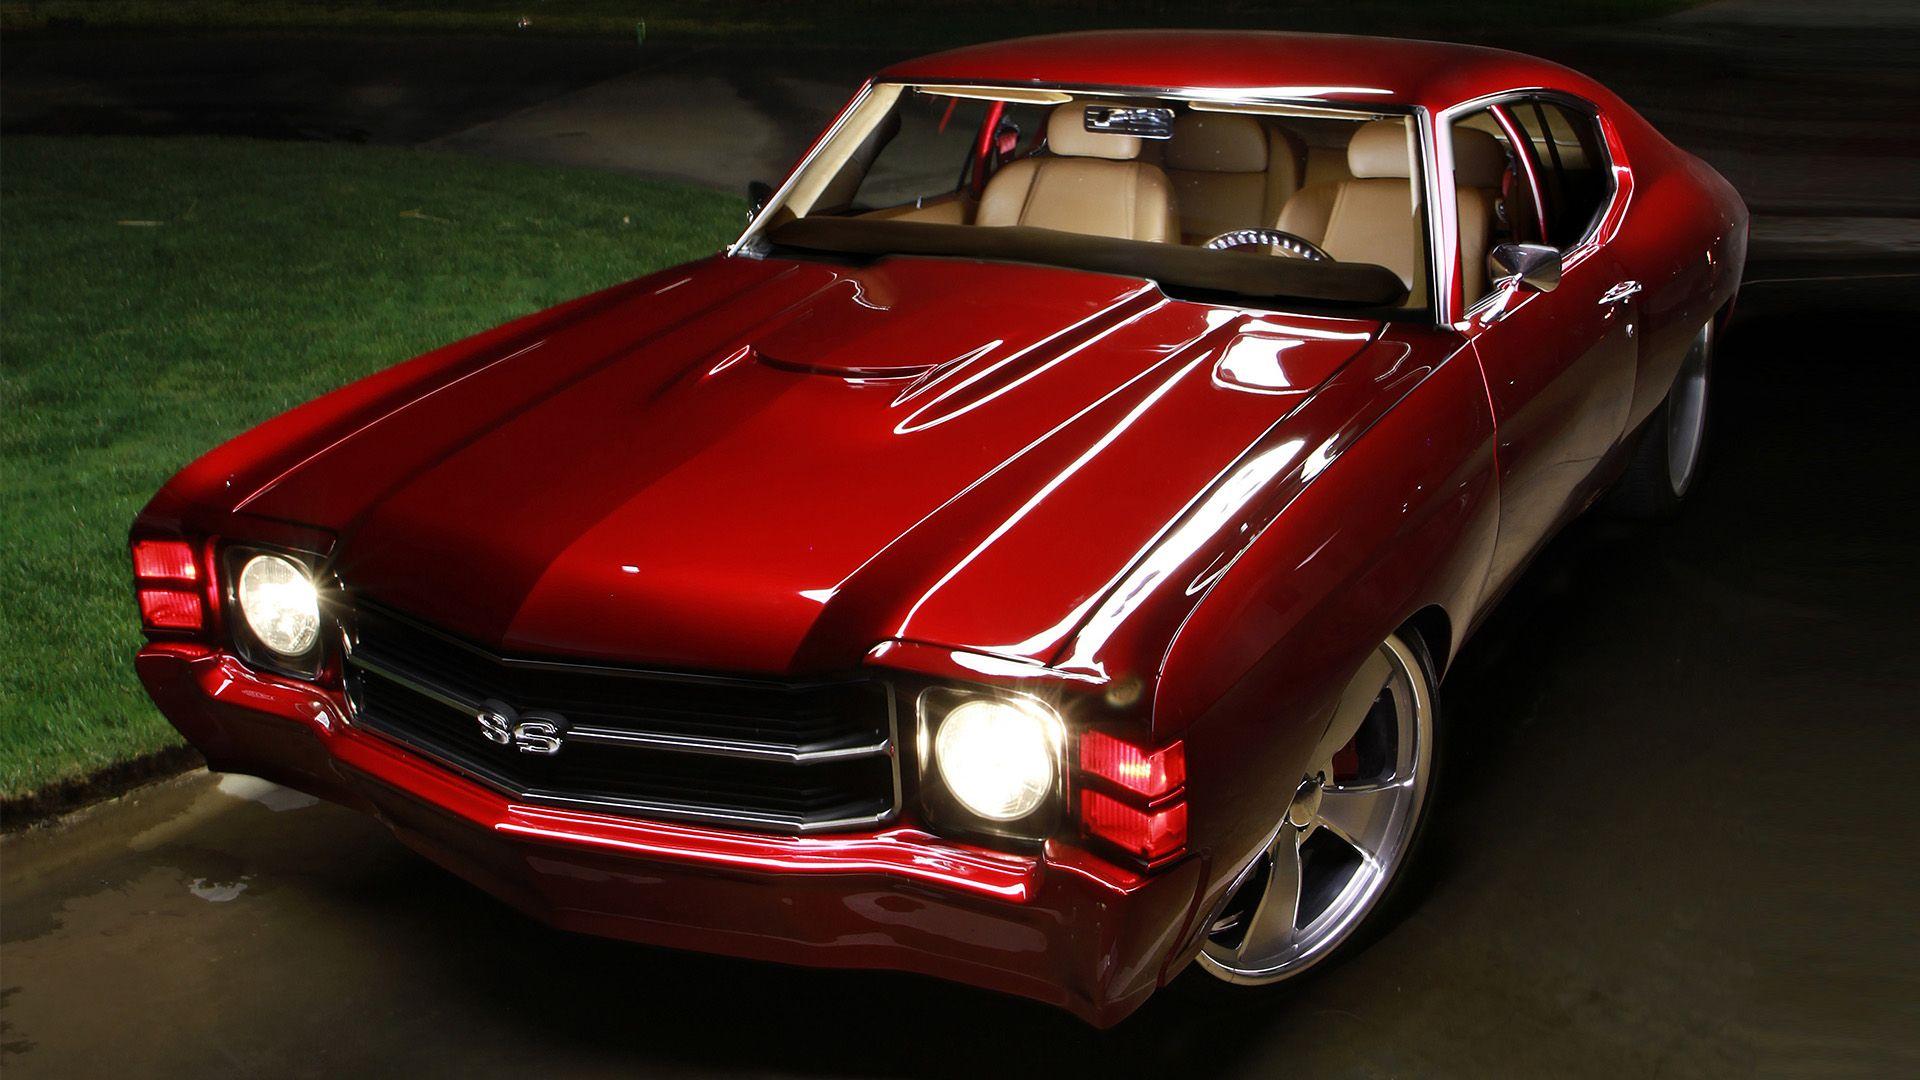 DUB Magazine Chevy Chevelle SS: Old School Roots, New School Style